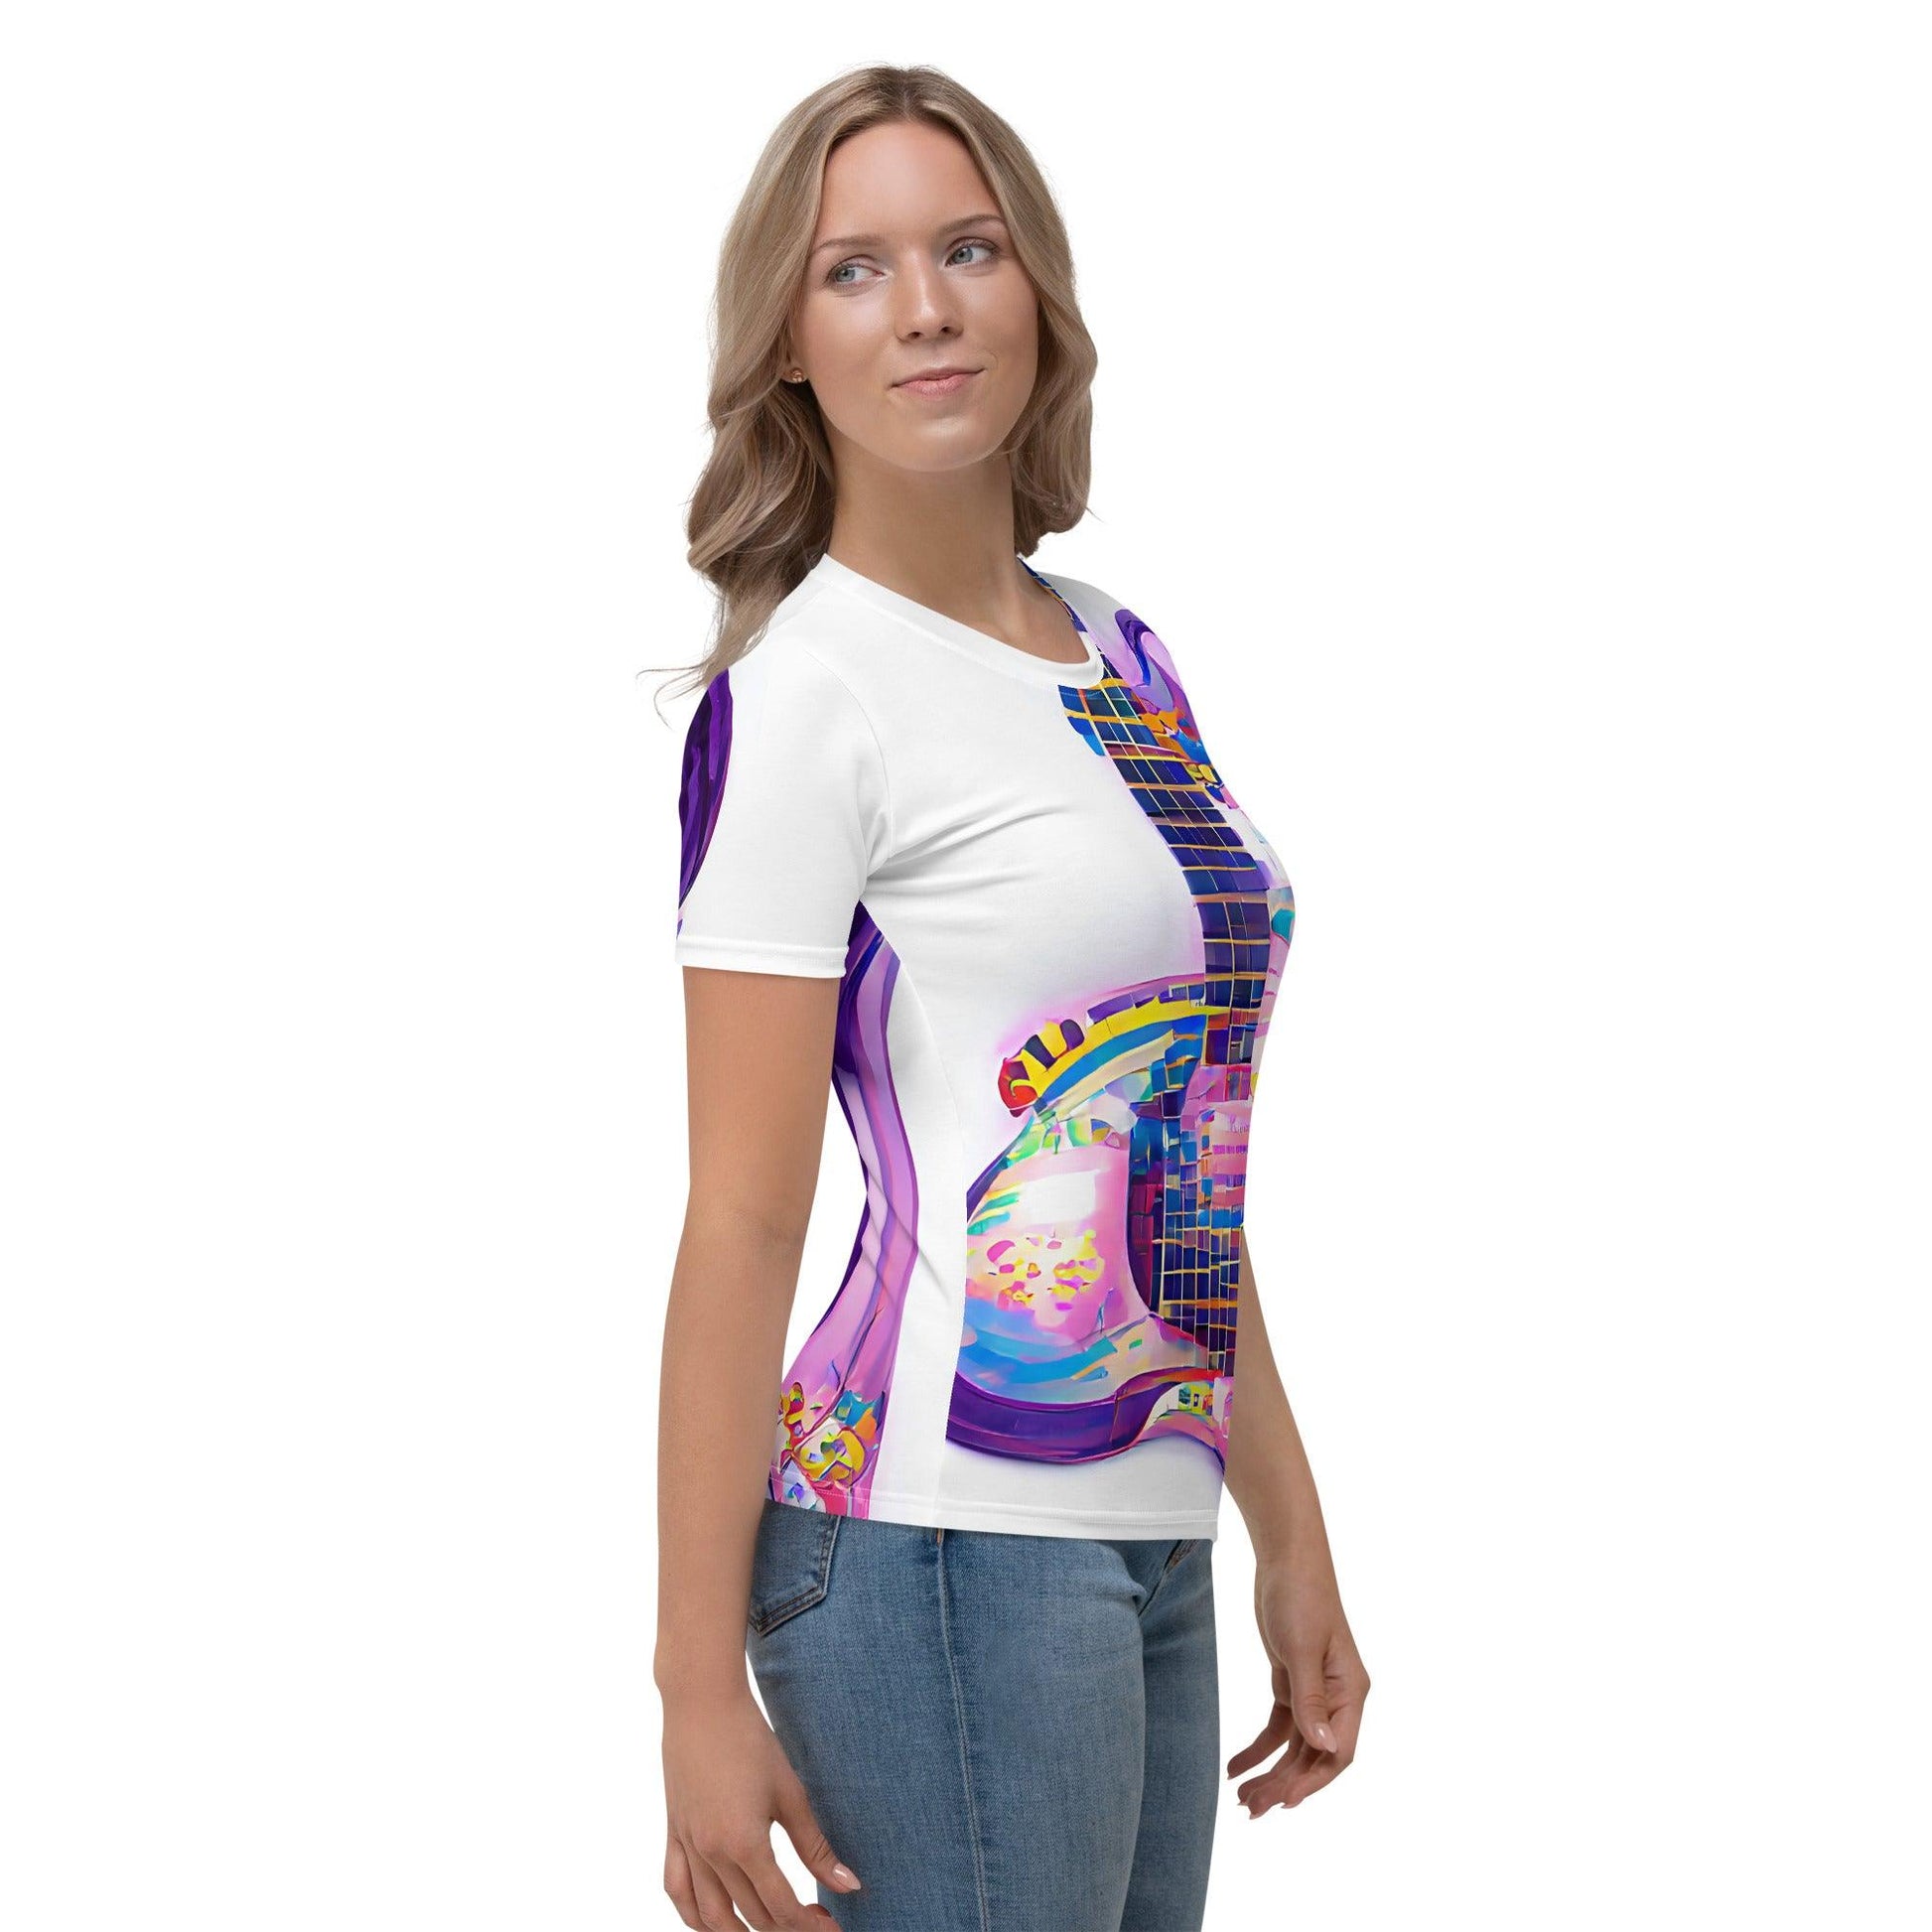 Hippie Guitar - Womens T-Shirt - iSAW Company